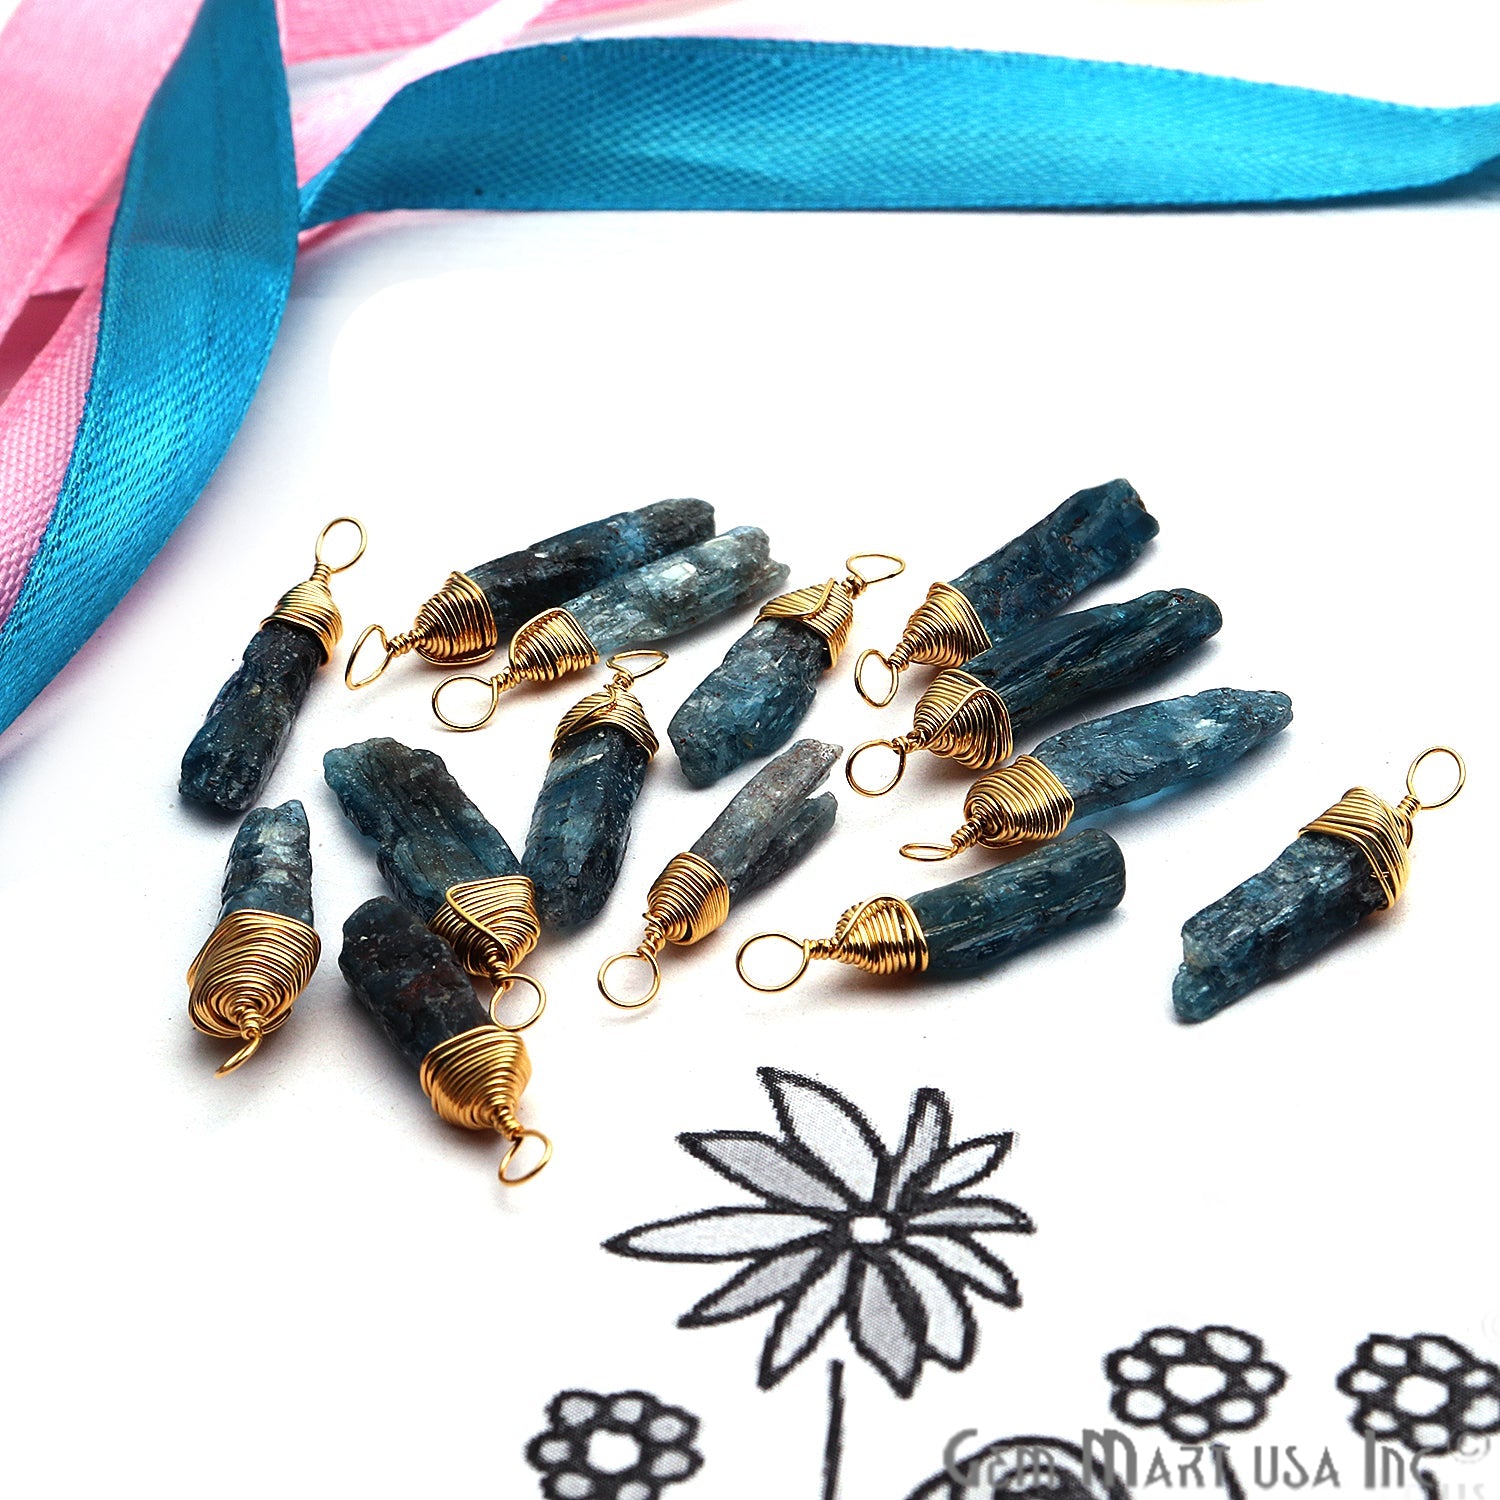 Blue Kyanite Gold Wire Wrapped 27x6mm Jewelry Making Rough Shape Connector - GemMartUSA